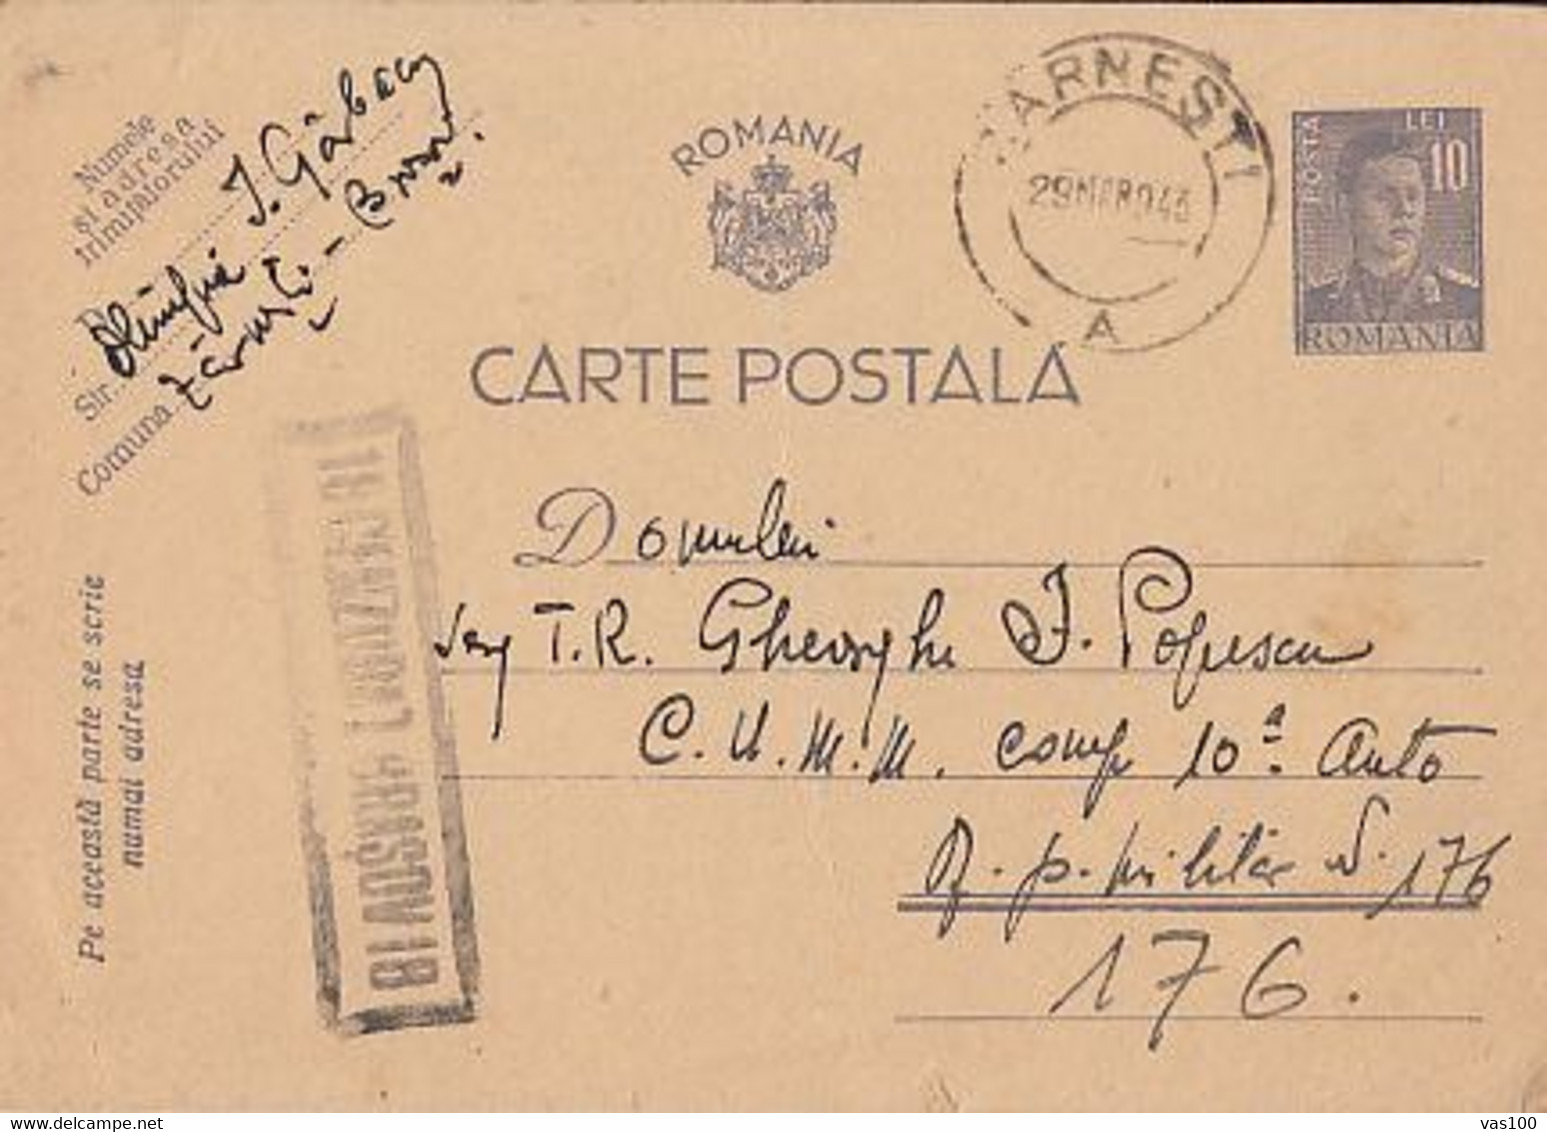 WW2 LETTERS, CENSORED BRASOV NR 18, KING MICHAEL PC STATIONERY, ENTIER POSTAL, 1943, ROMANIA - World War 2 Letters